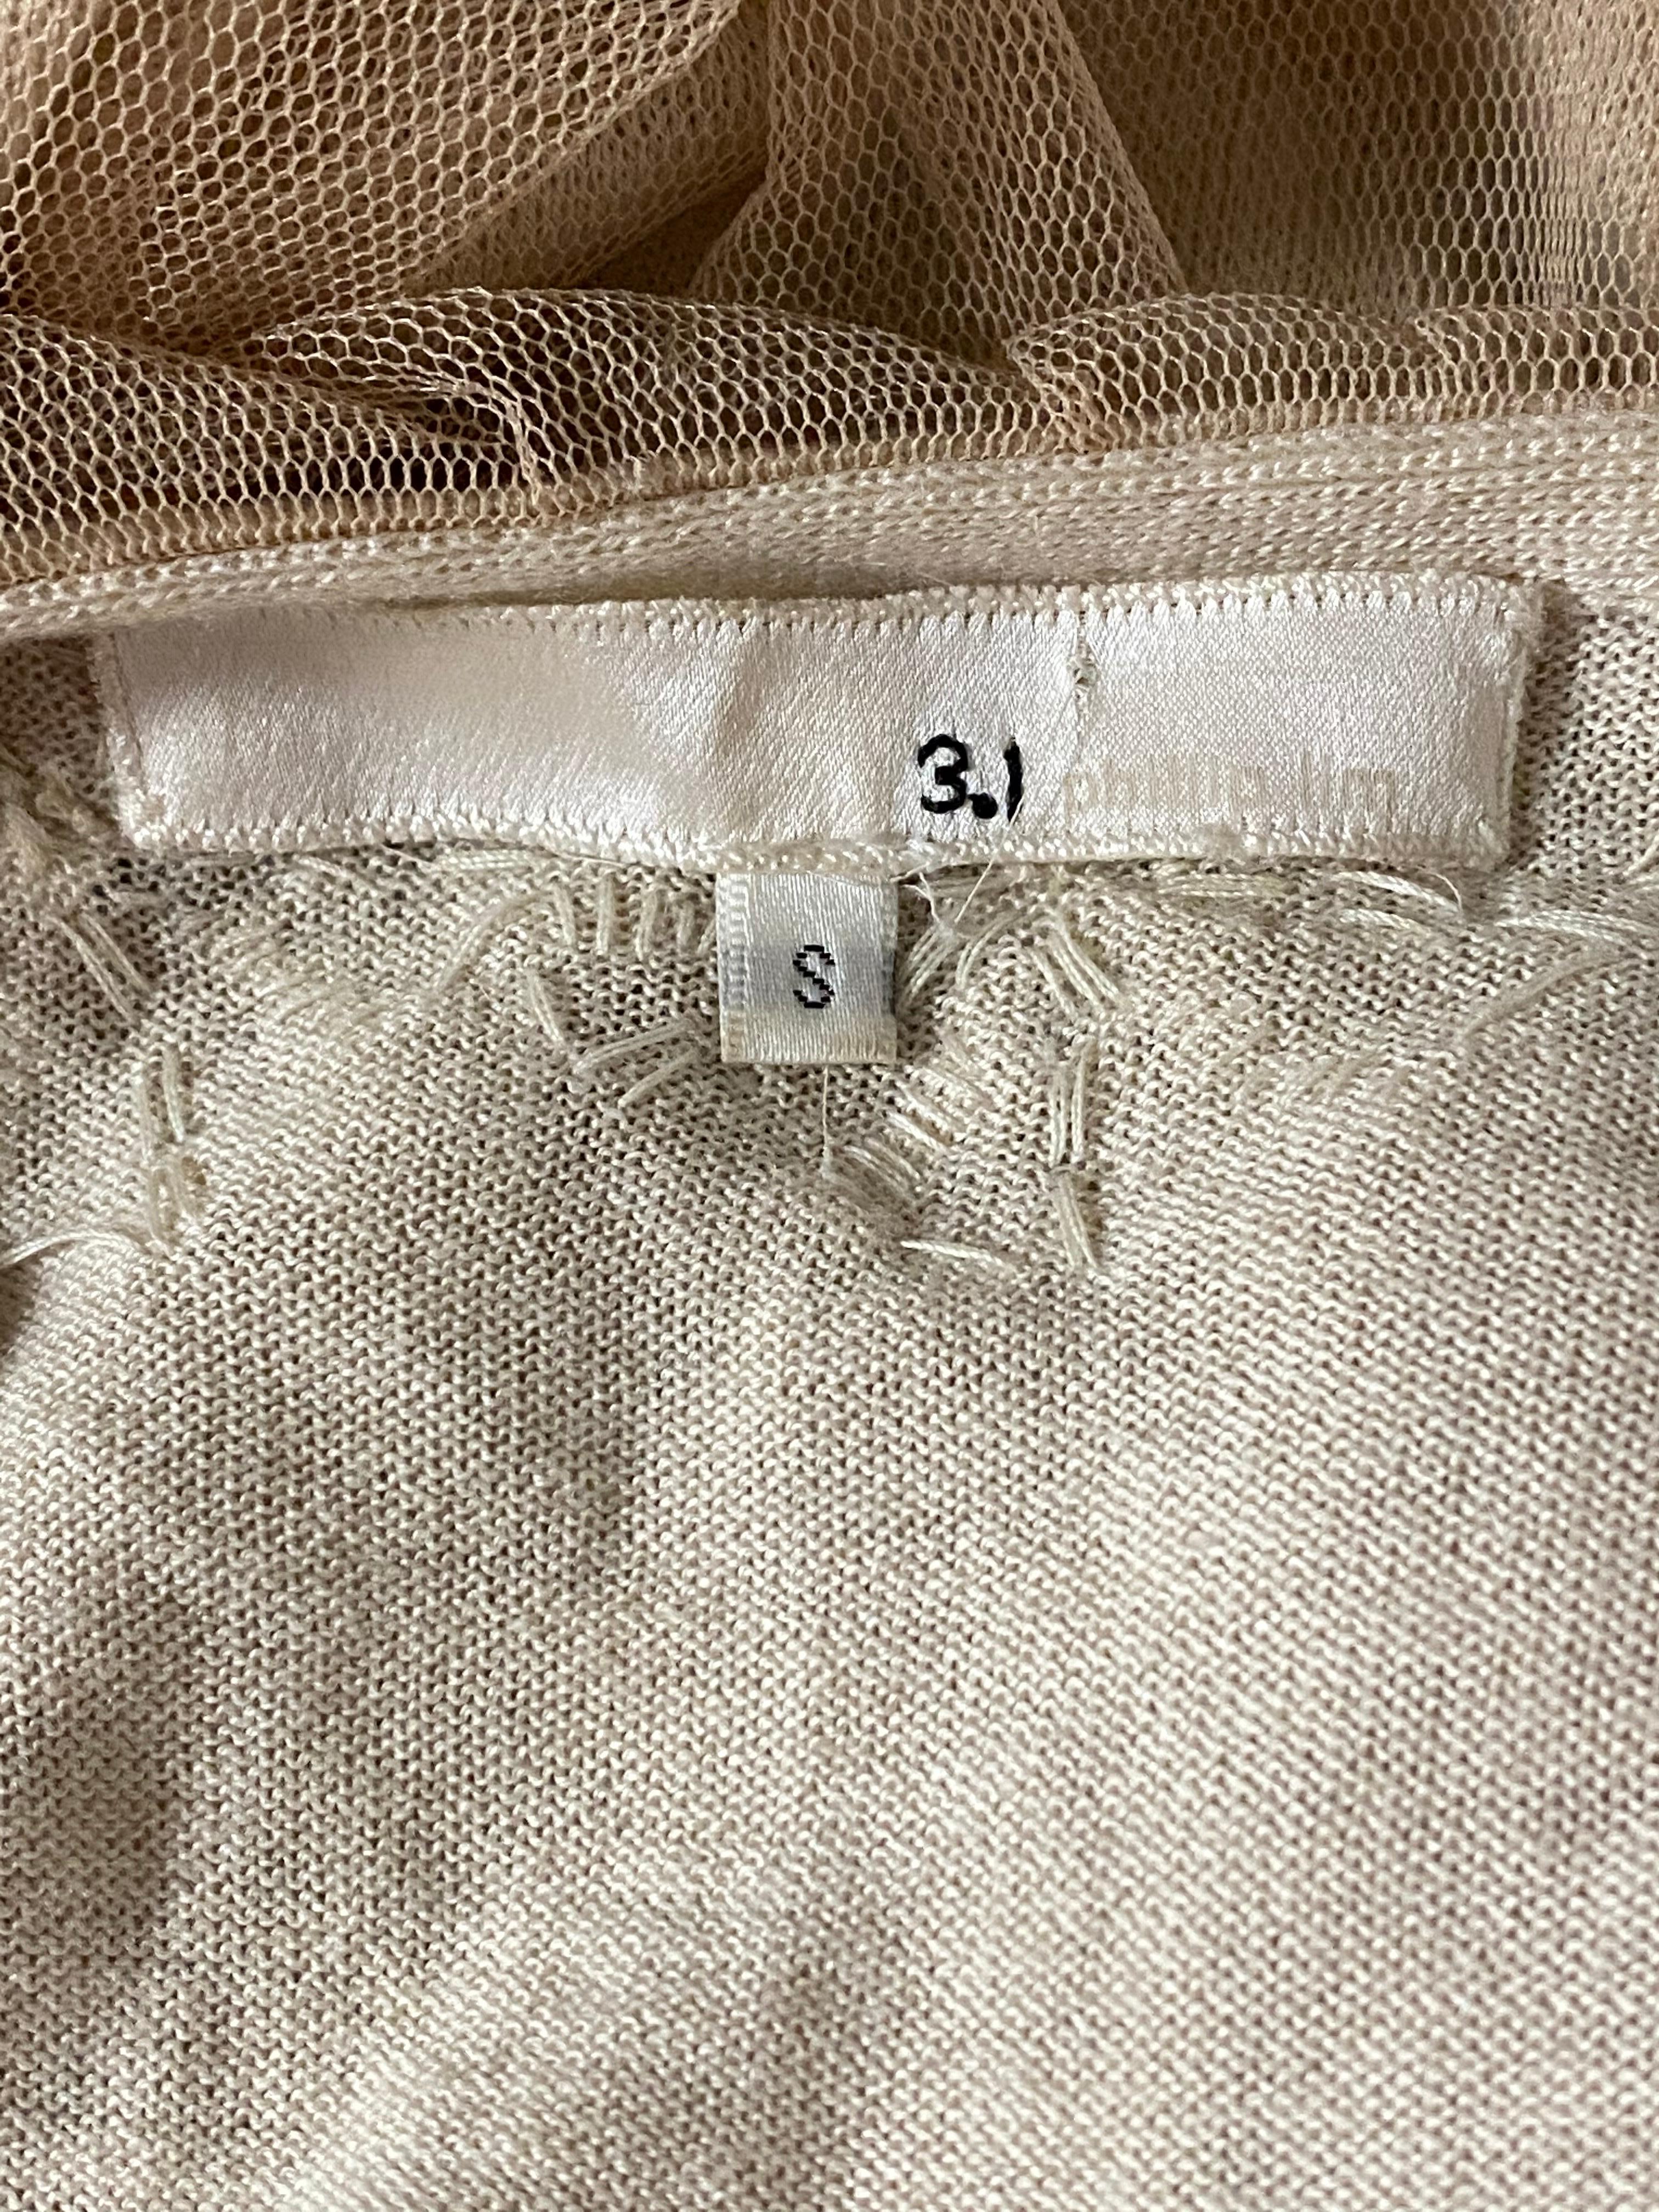 3.1 Phillip Lim Beige Knit and Tulle Vest Blouse Top, Size Small For Sale 3